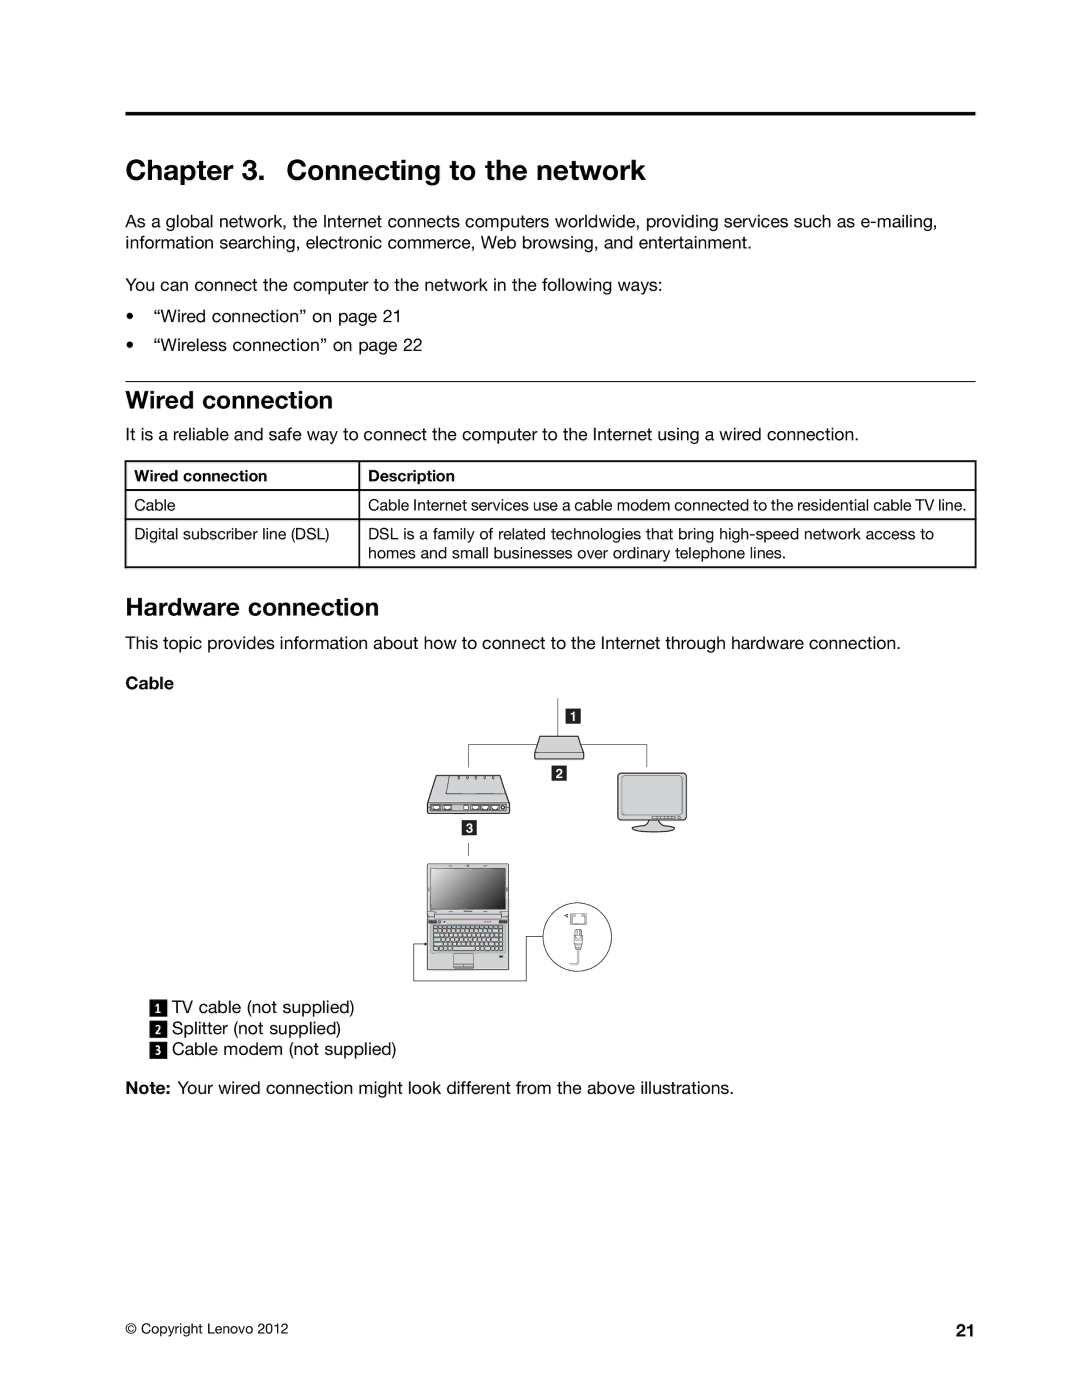 Lenovo B485 manual Connecting to the network, Wired connection, Hardware connection, Cable 